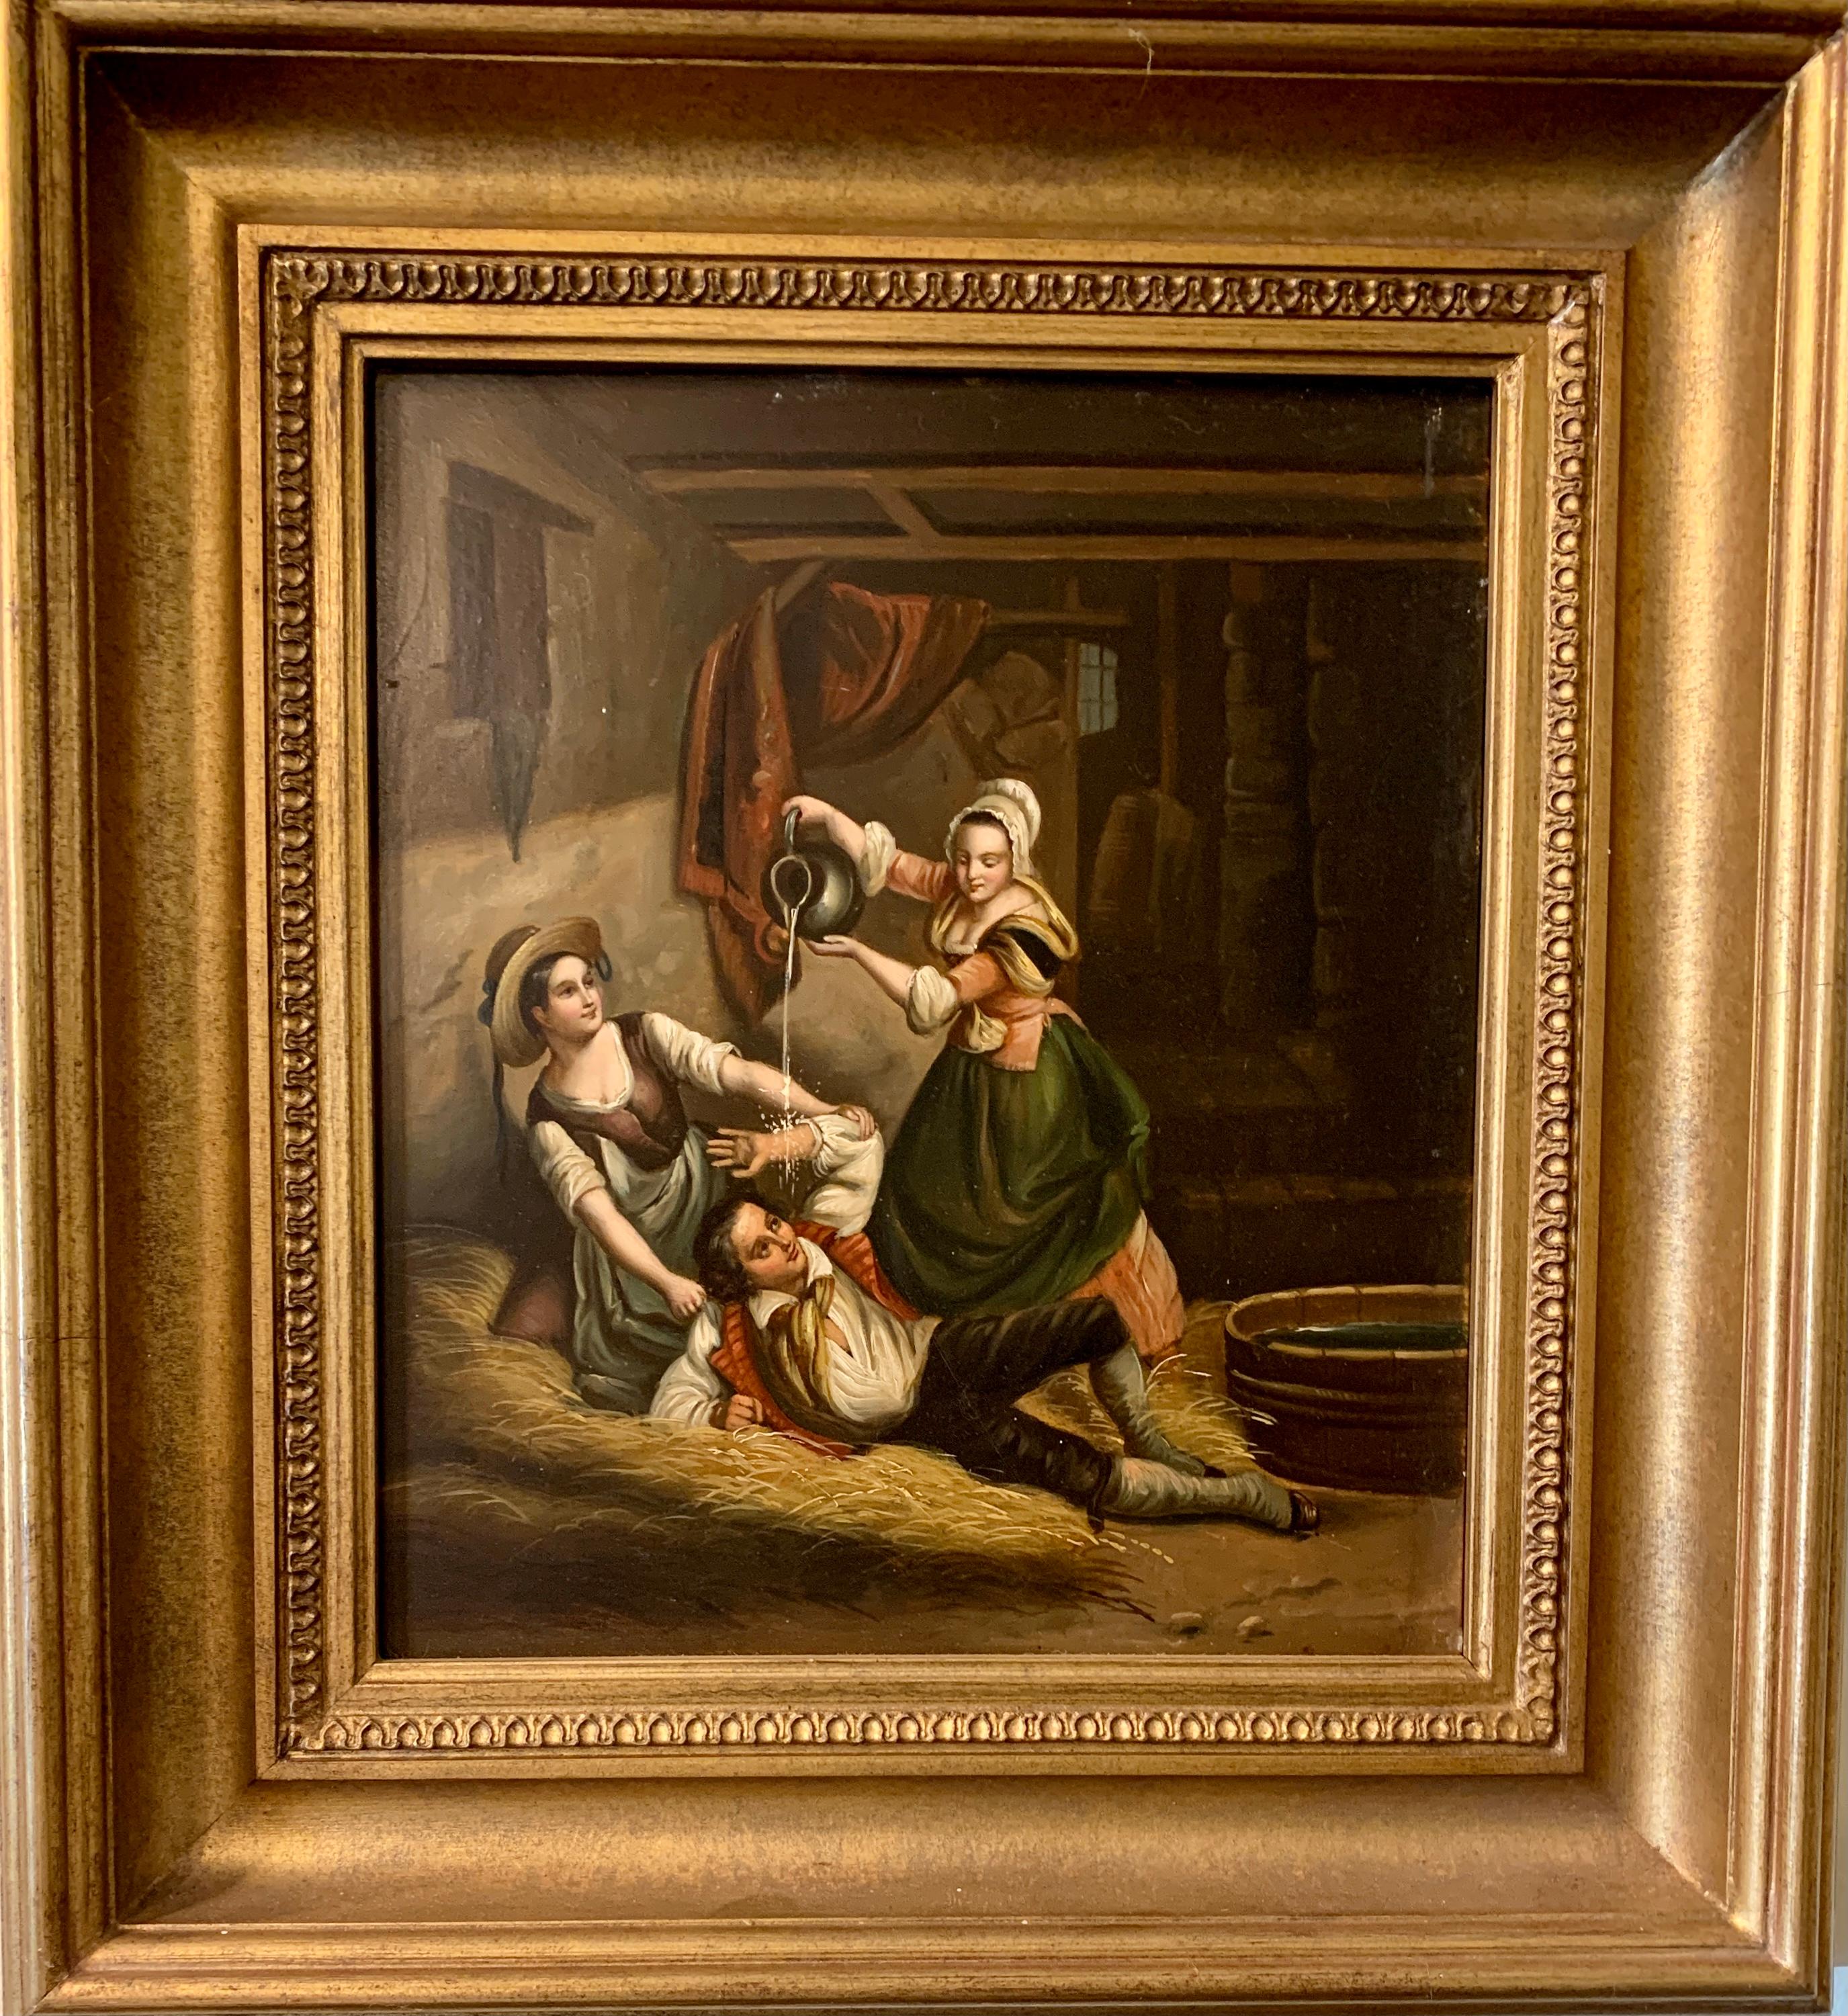 Unknown Figurative Painting - German oil painting, Figures in an interior/barn playing, 19th century, Antique